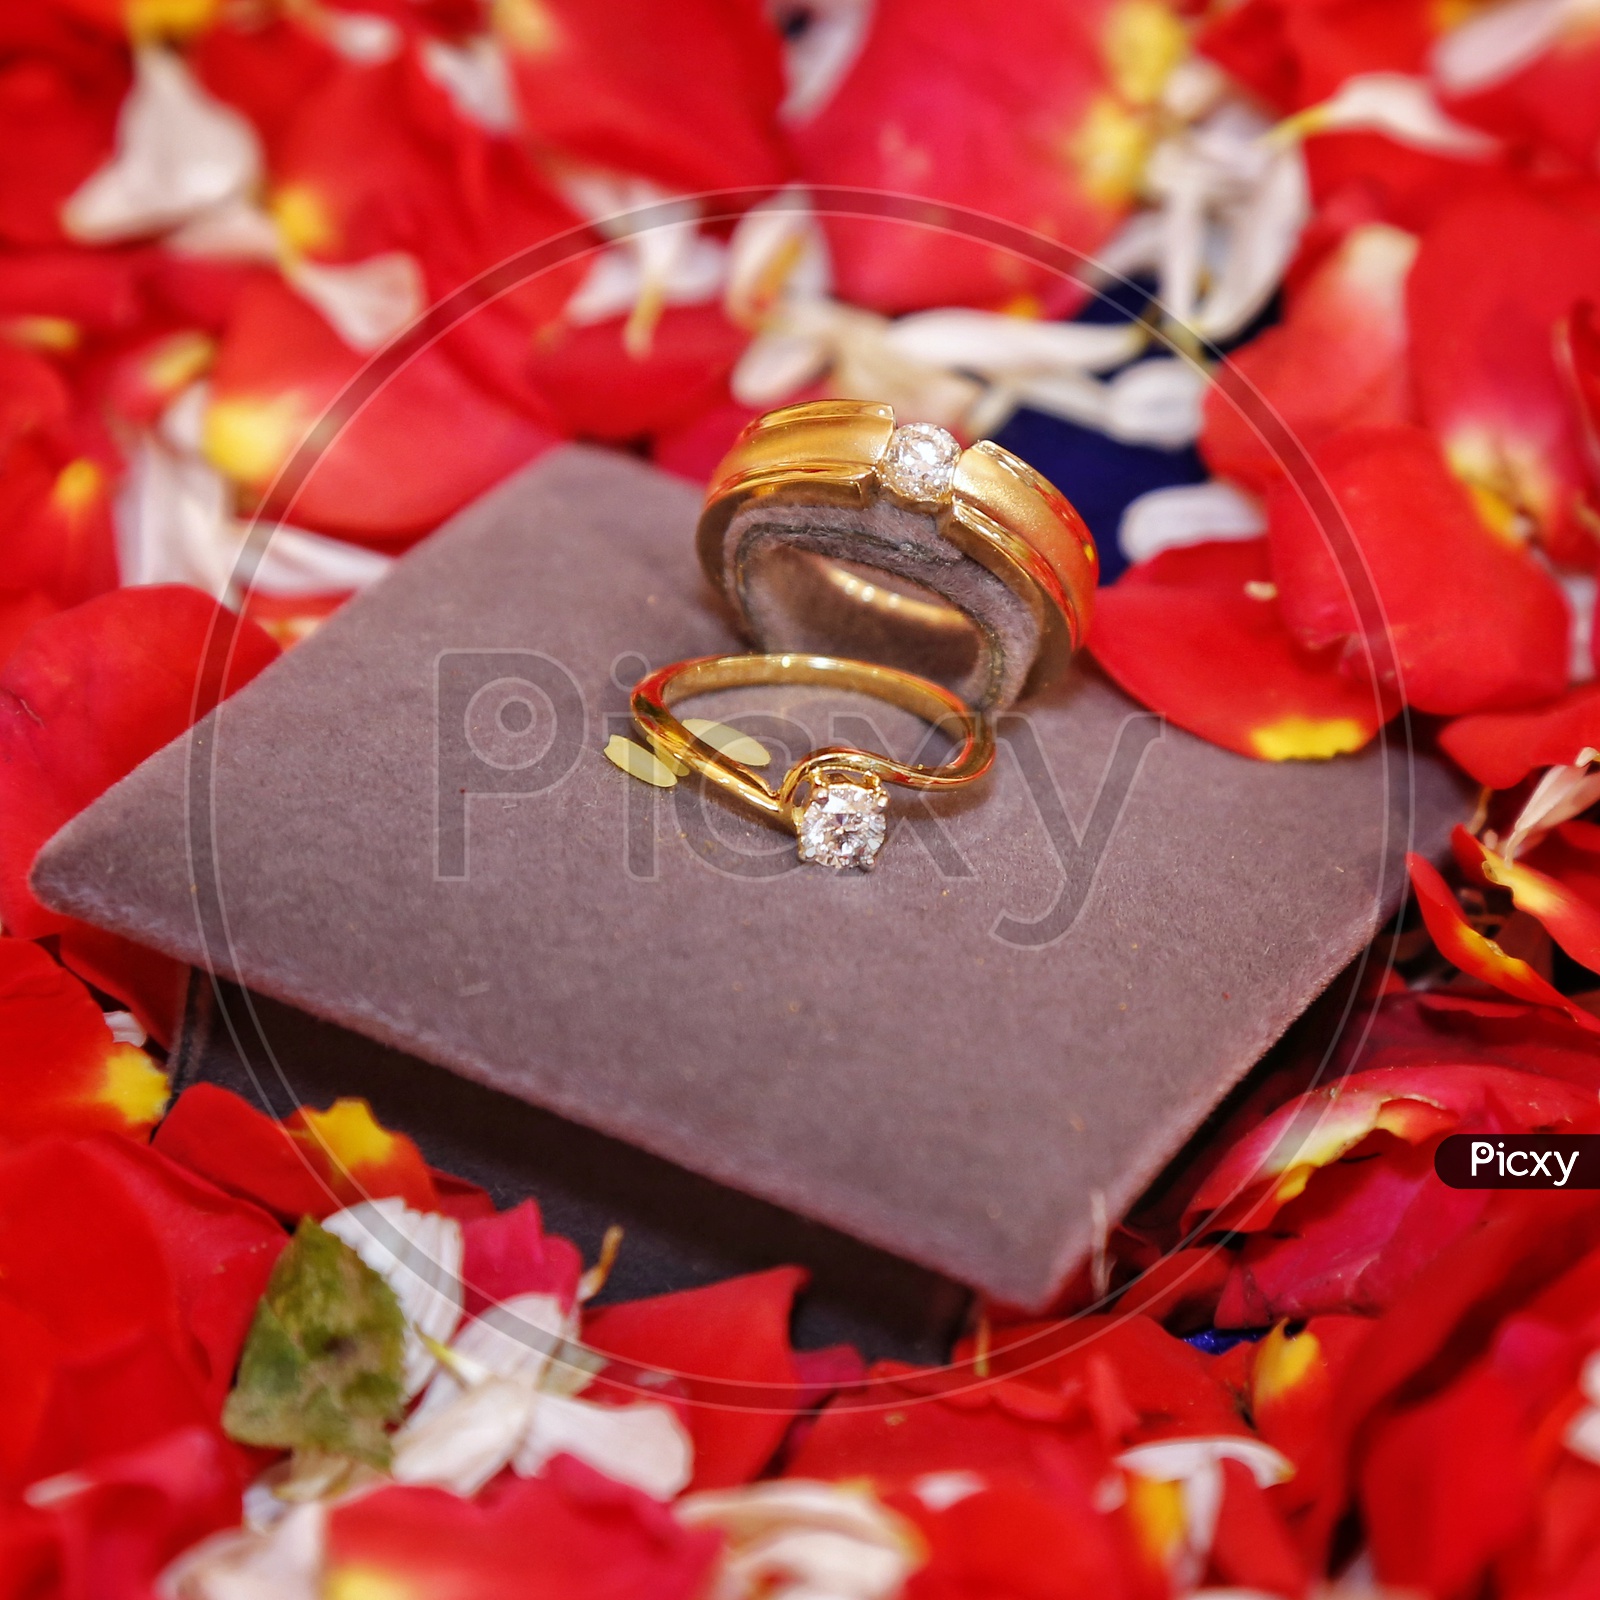 Ring Ceremony | Engagement photography poses, Couple engagement pictures,  Engagement ring photoshoot